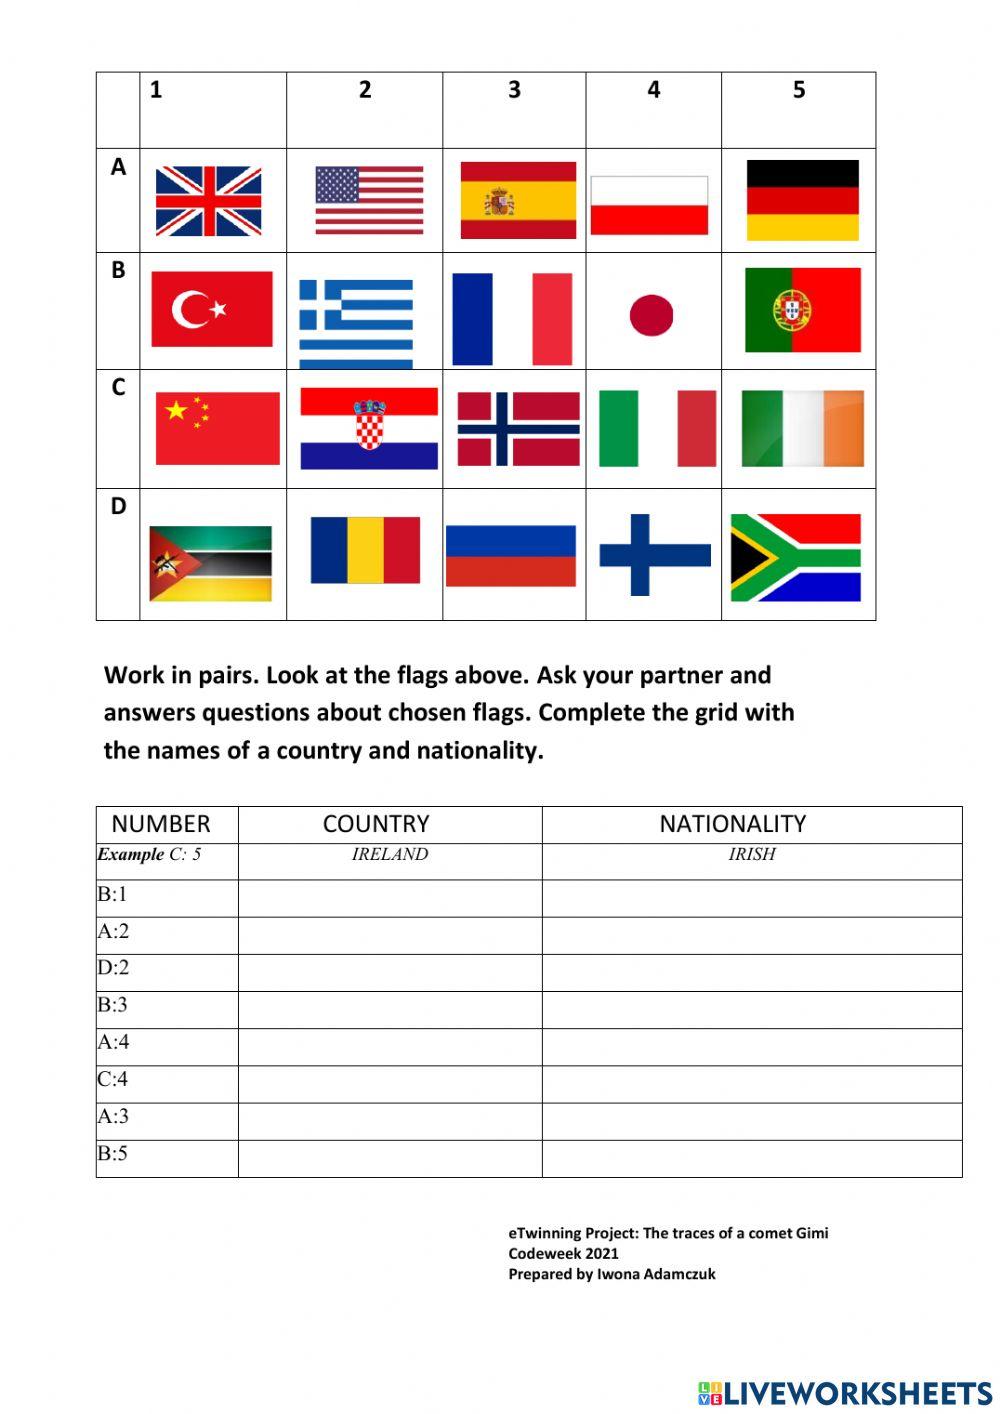 Gimi Etwinning Project codeweek 2021 - countries and nationalities